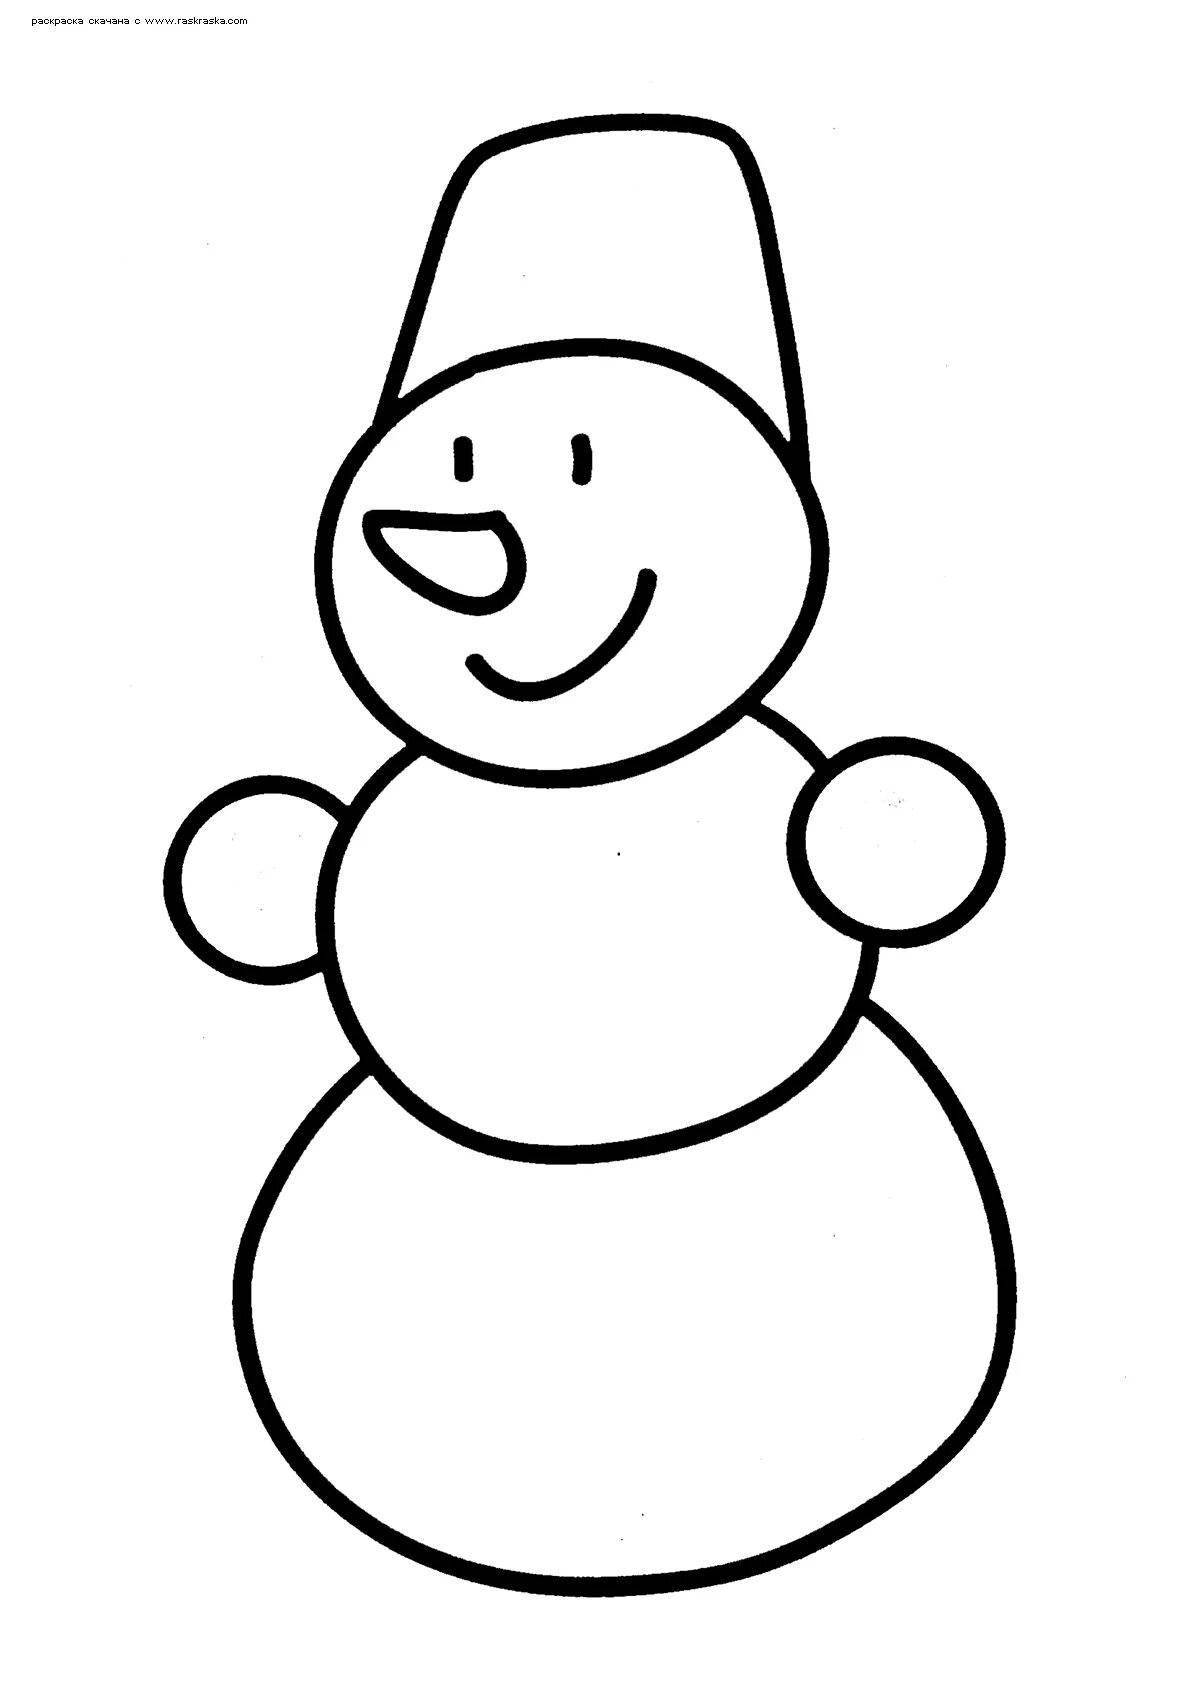 Animated snowman coloring book for children 6-7 years old